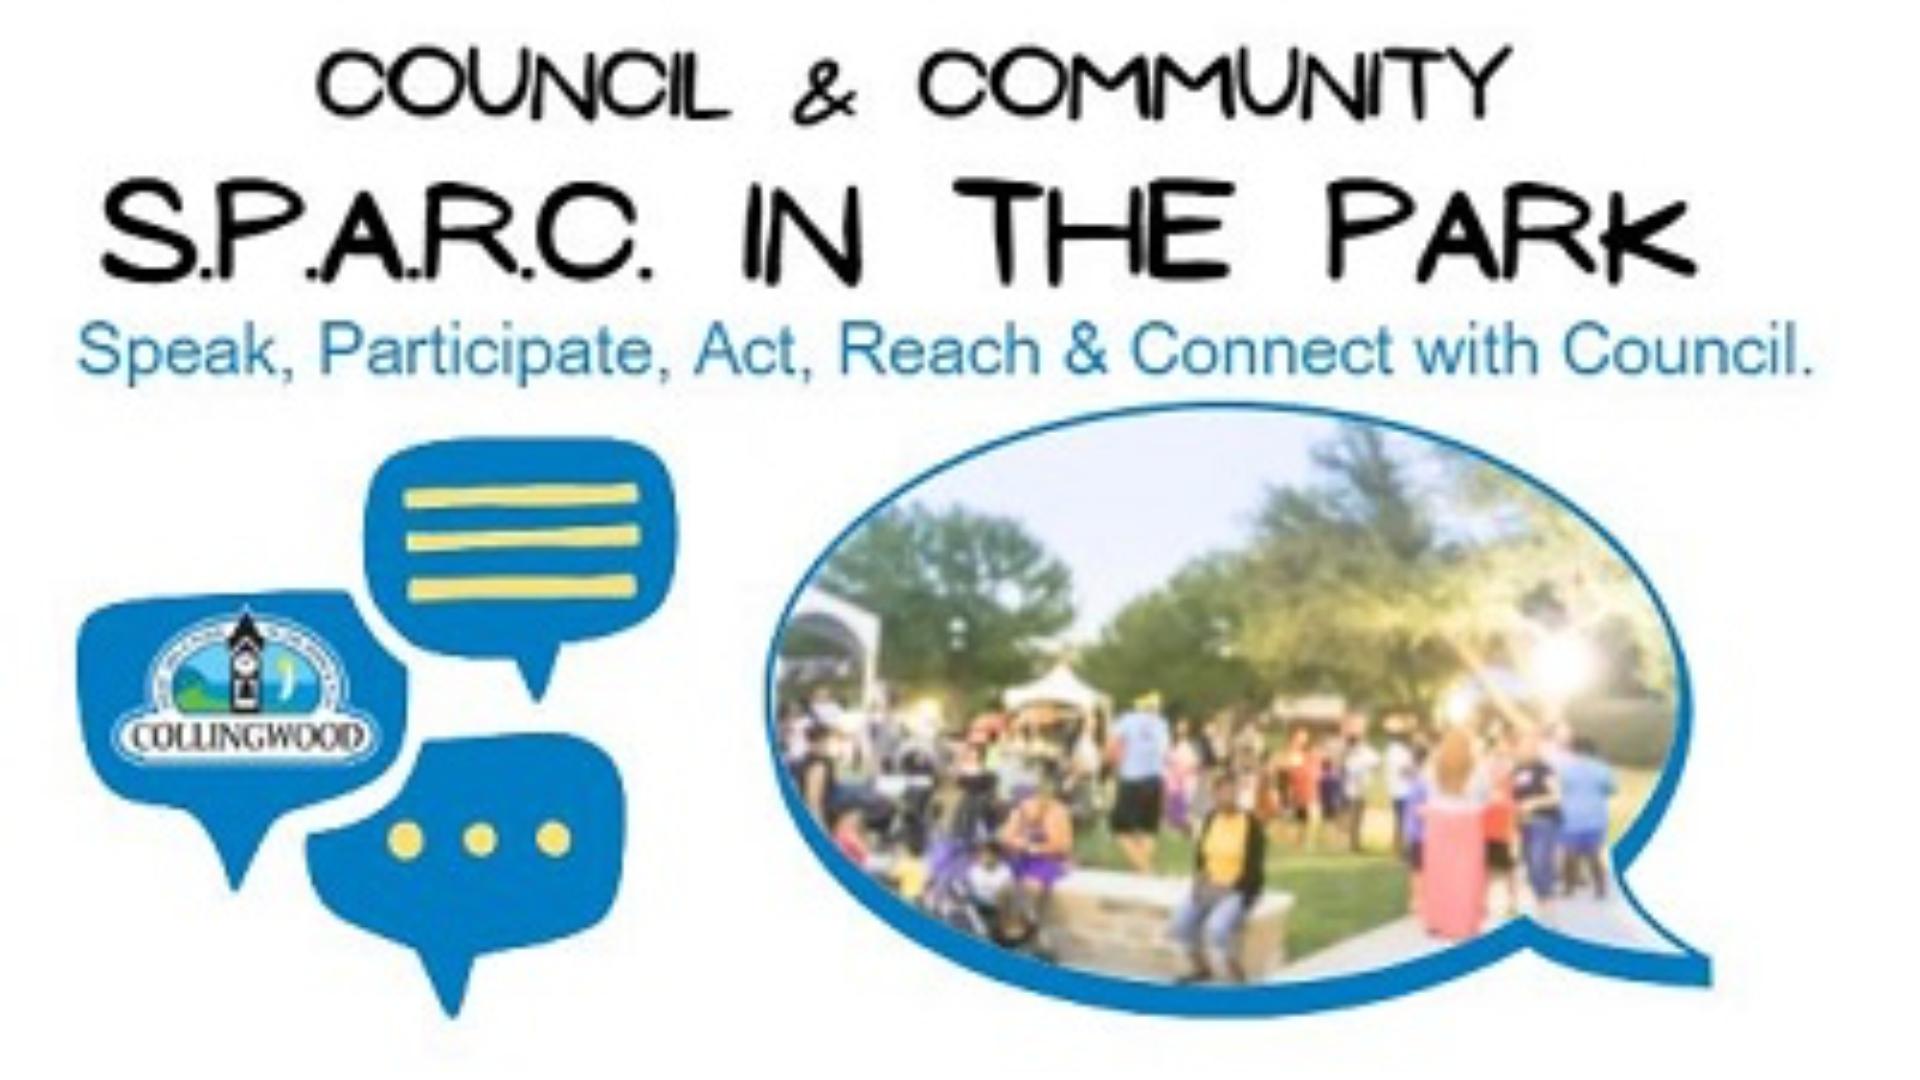 Council & Community S.P.A.R.C. in the Park events encourage residents to come chat with Council